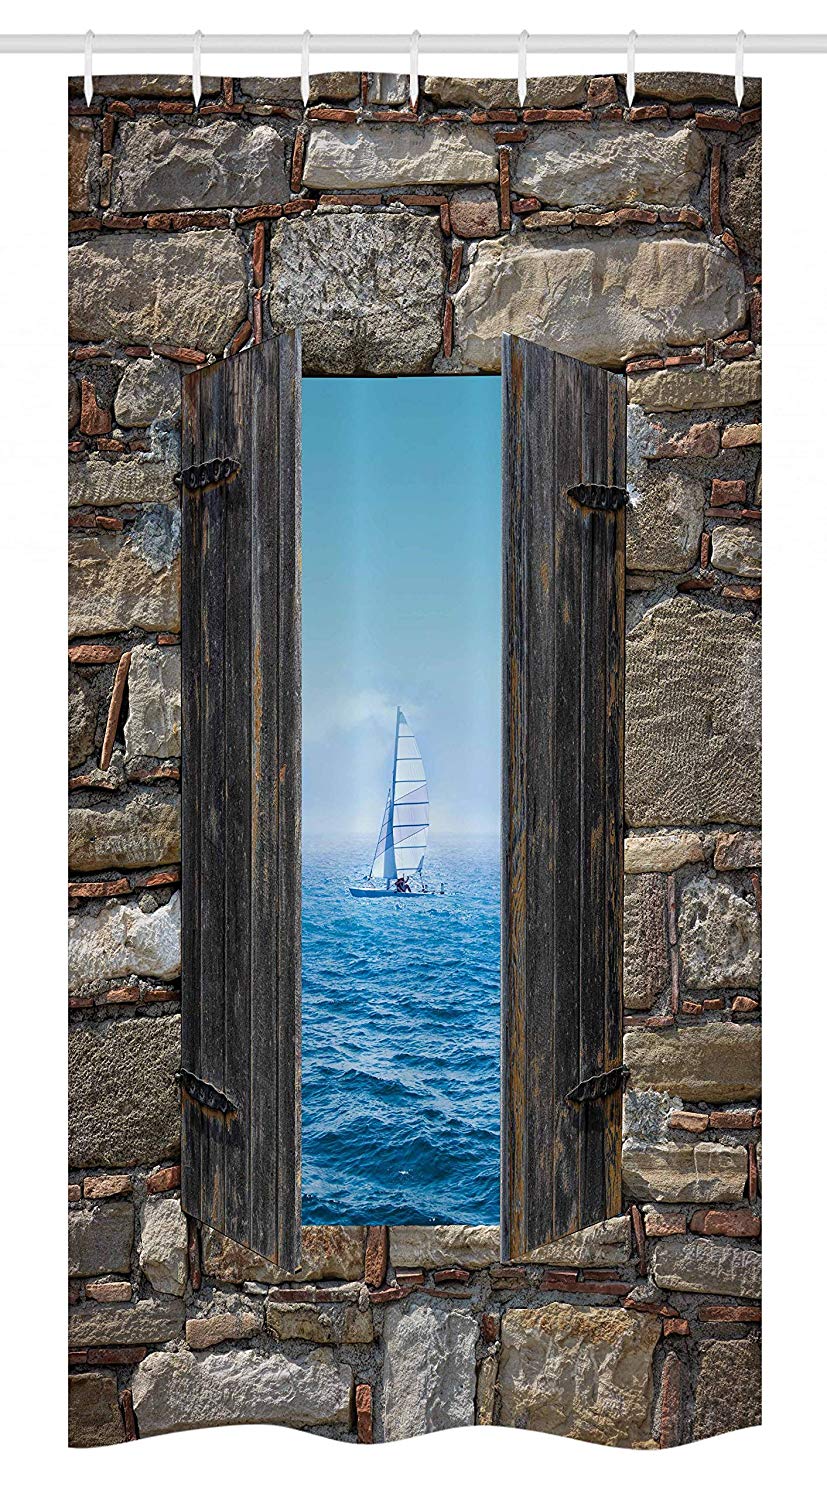 Ambesonne Nautical Stall Shower Curtain, Image of a Sailing Boat from Stone Window Narrow Perspective Idyllic Mediterranean, Fabric Bathroom Decor Set with Hooks, 36